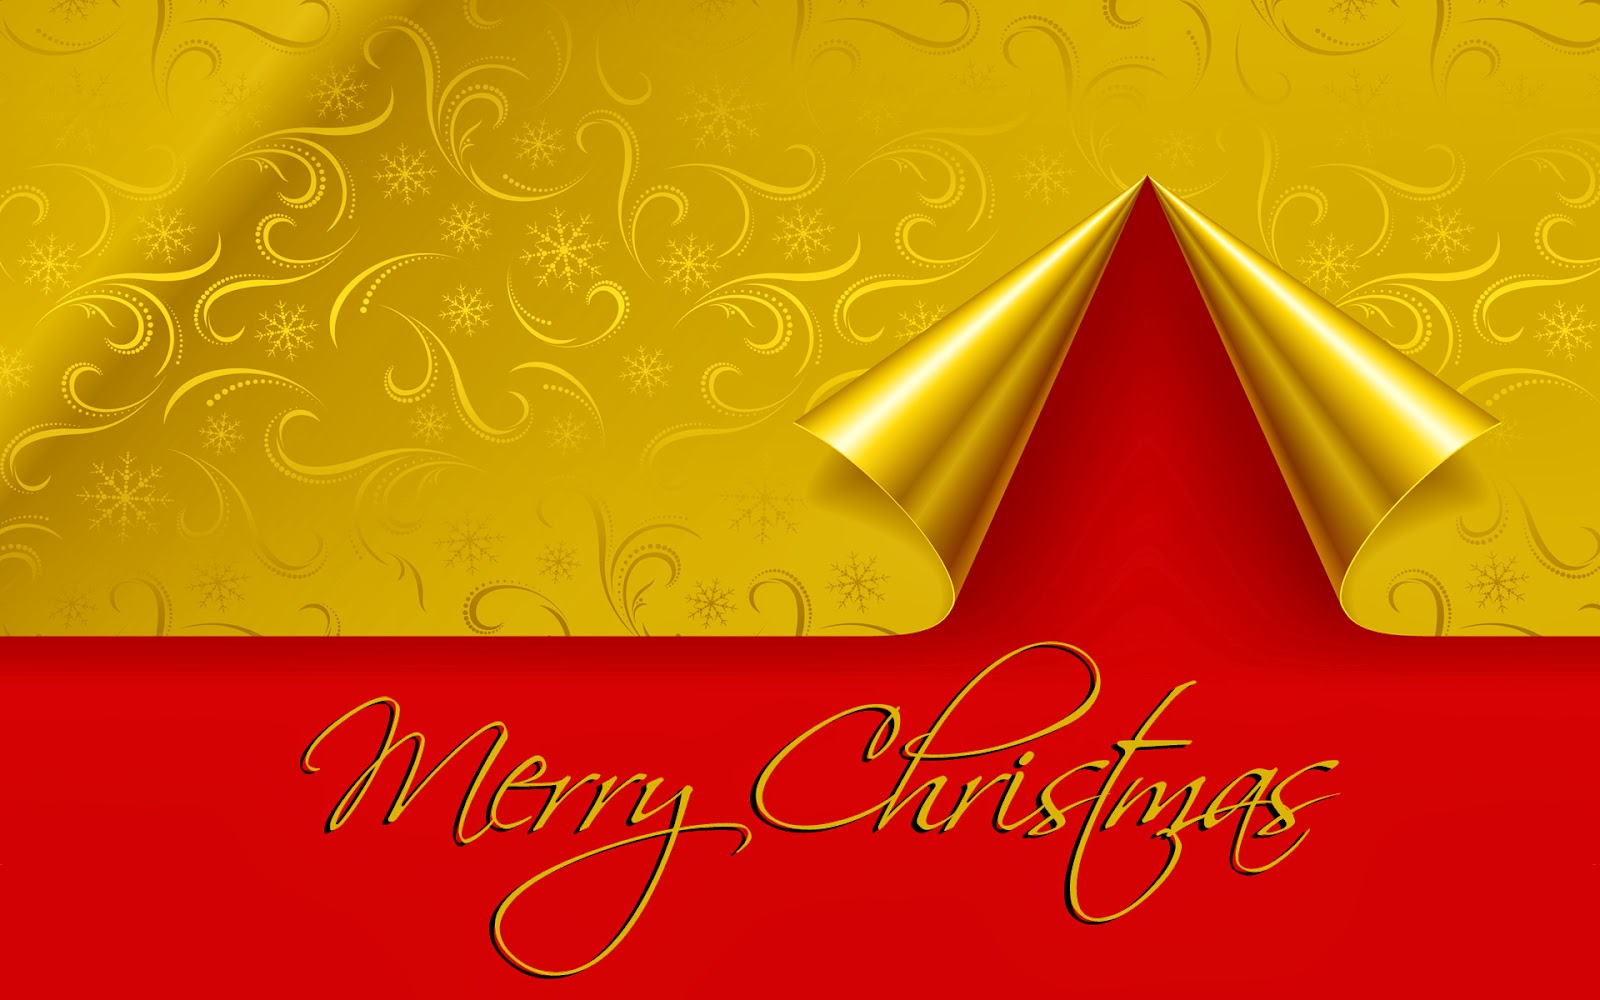 Christmas Greeting Card Messages HD Wallpapers   HD wallpapers 1600x1000